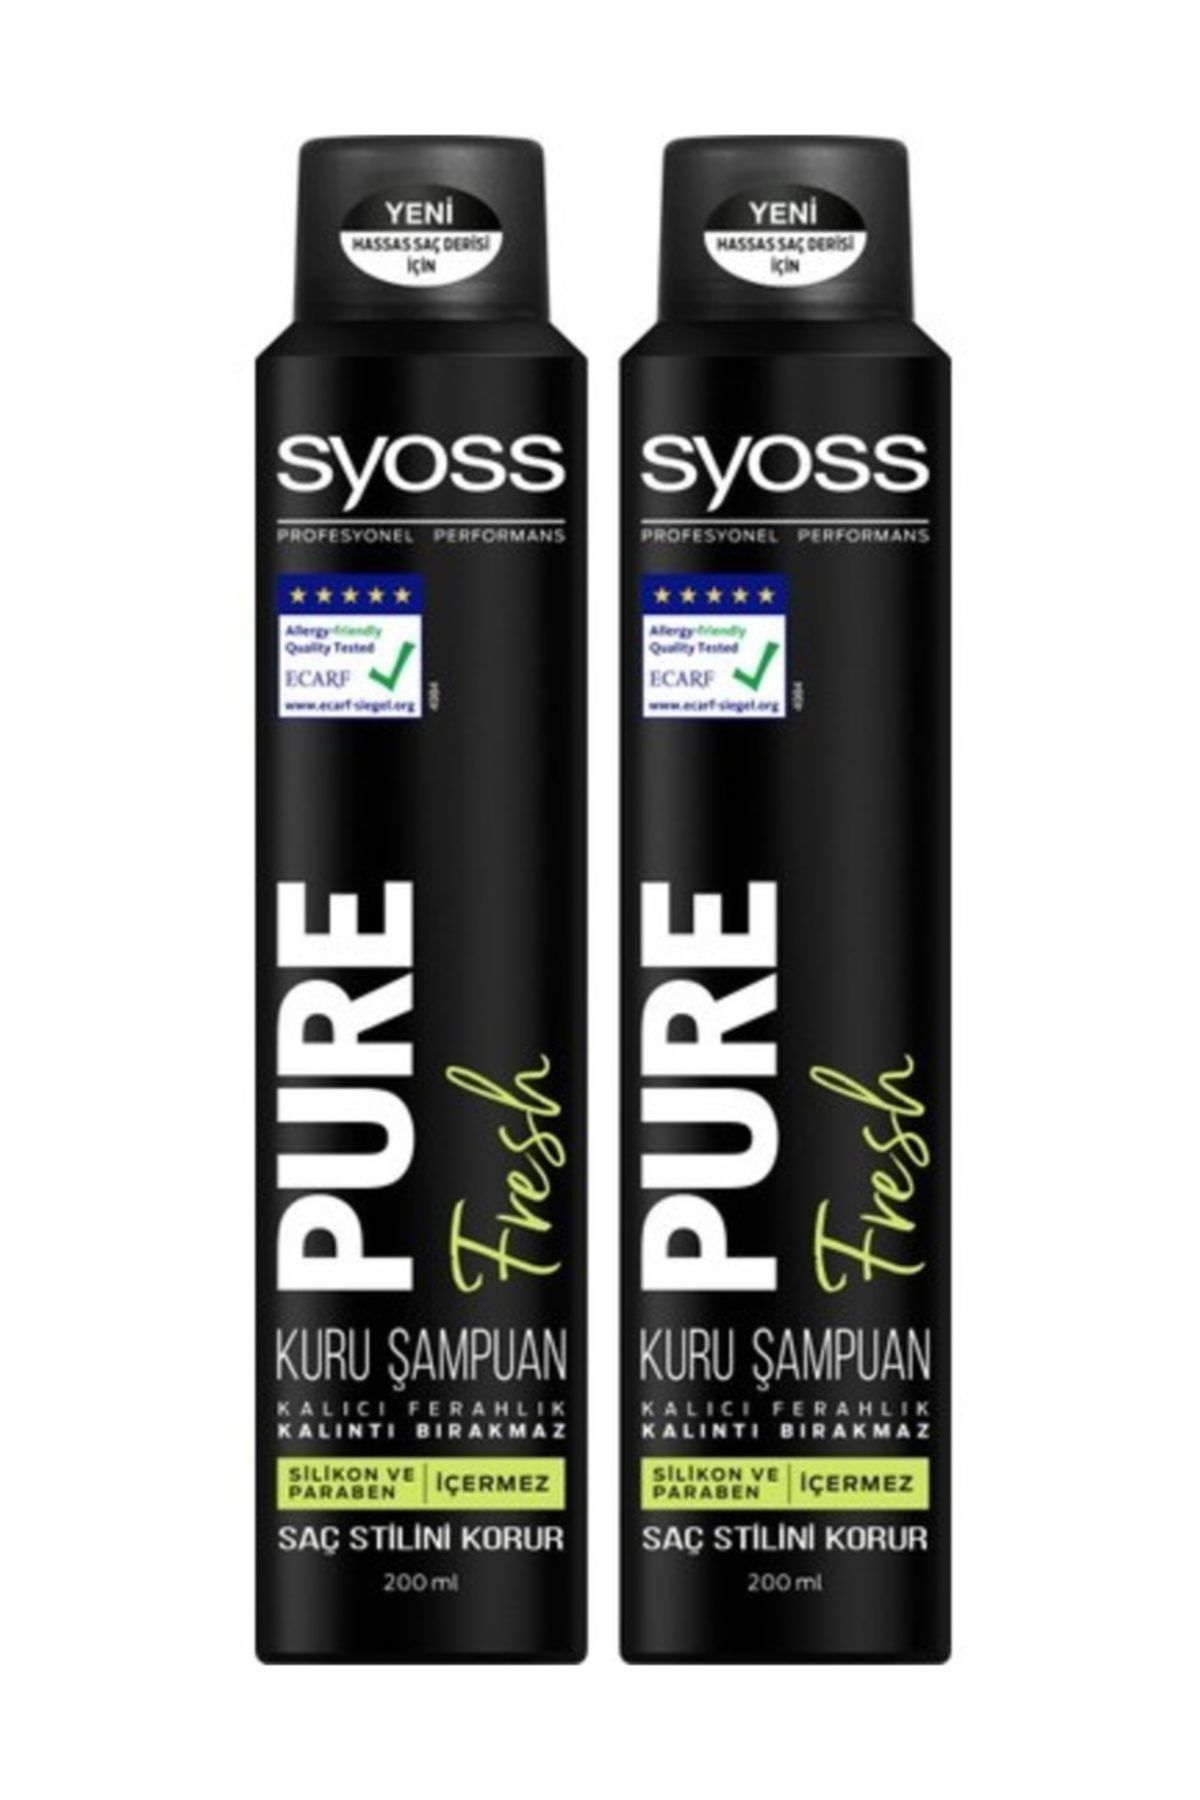 syoss pure suchy szampon